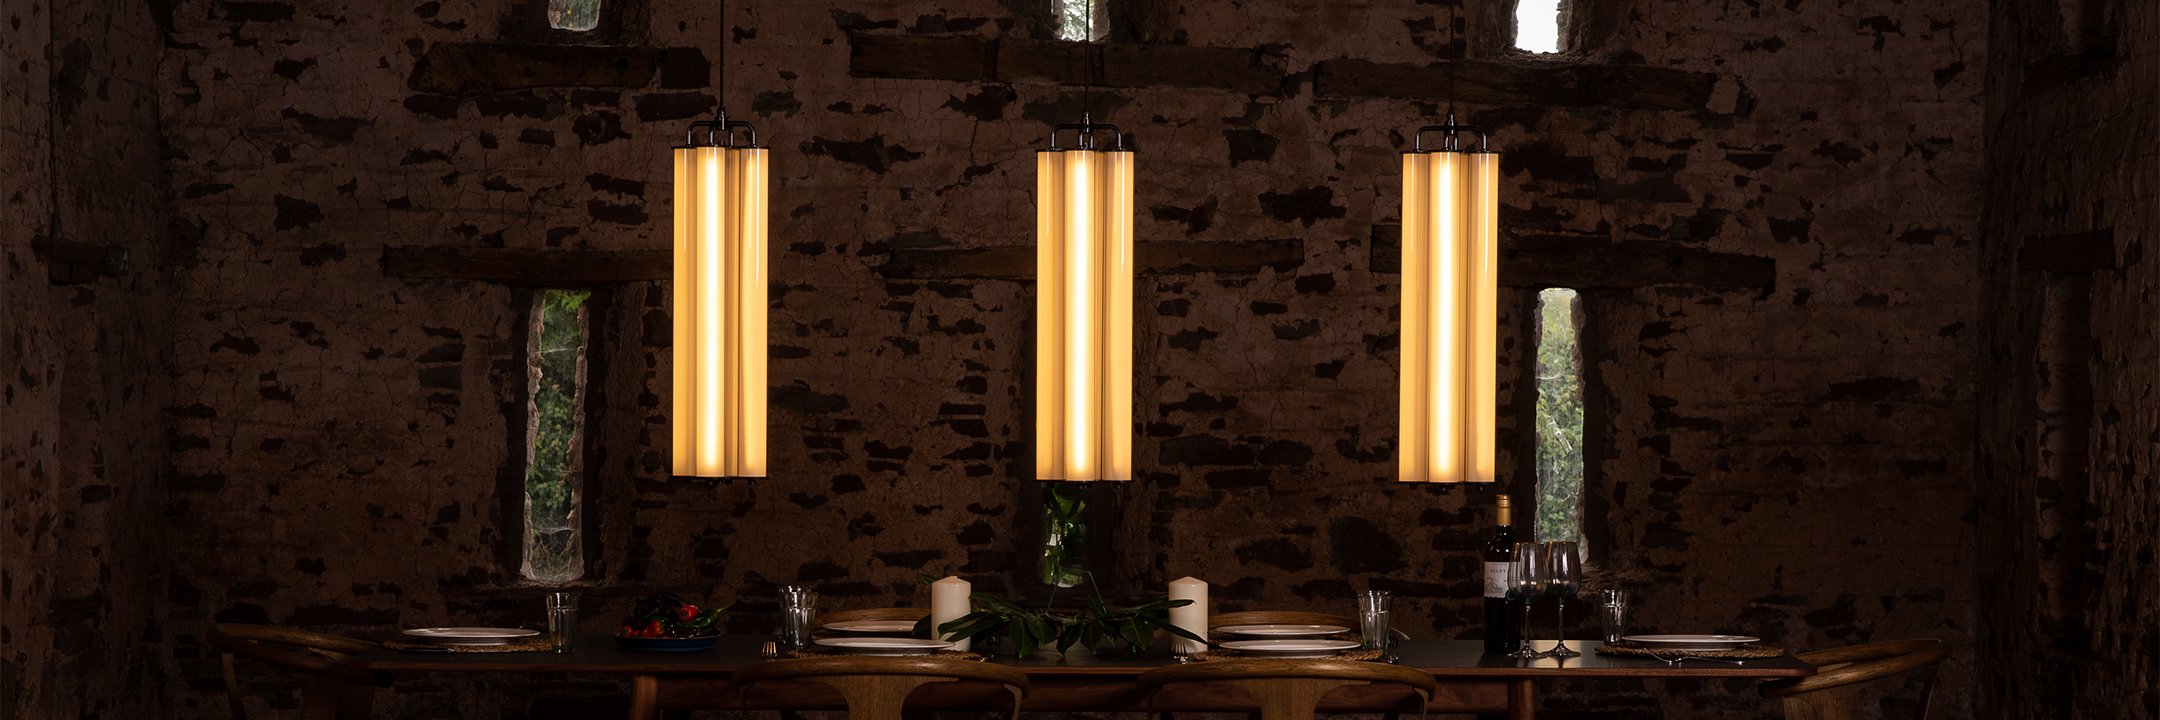 Three pillar lights from the Alton lighting collection, hung in a row over a large dining table.